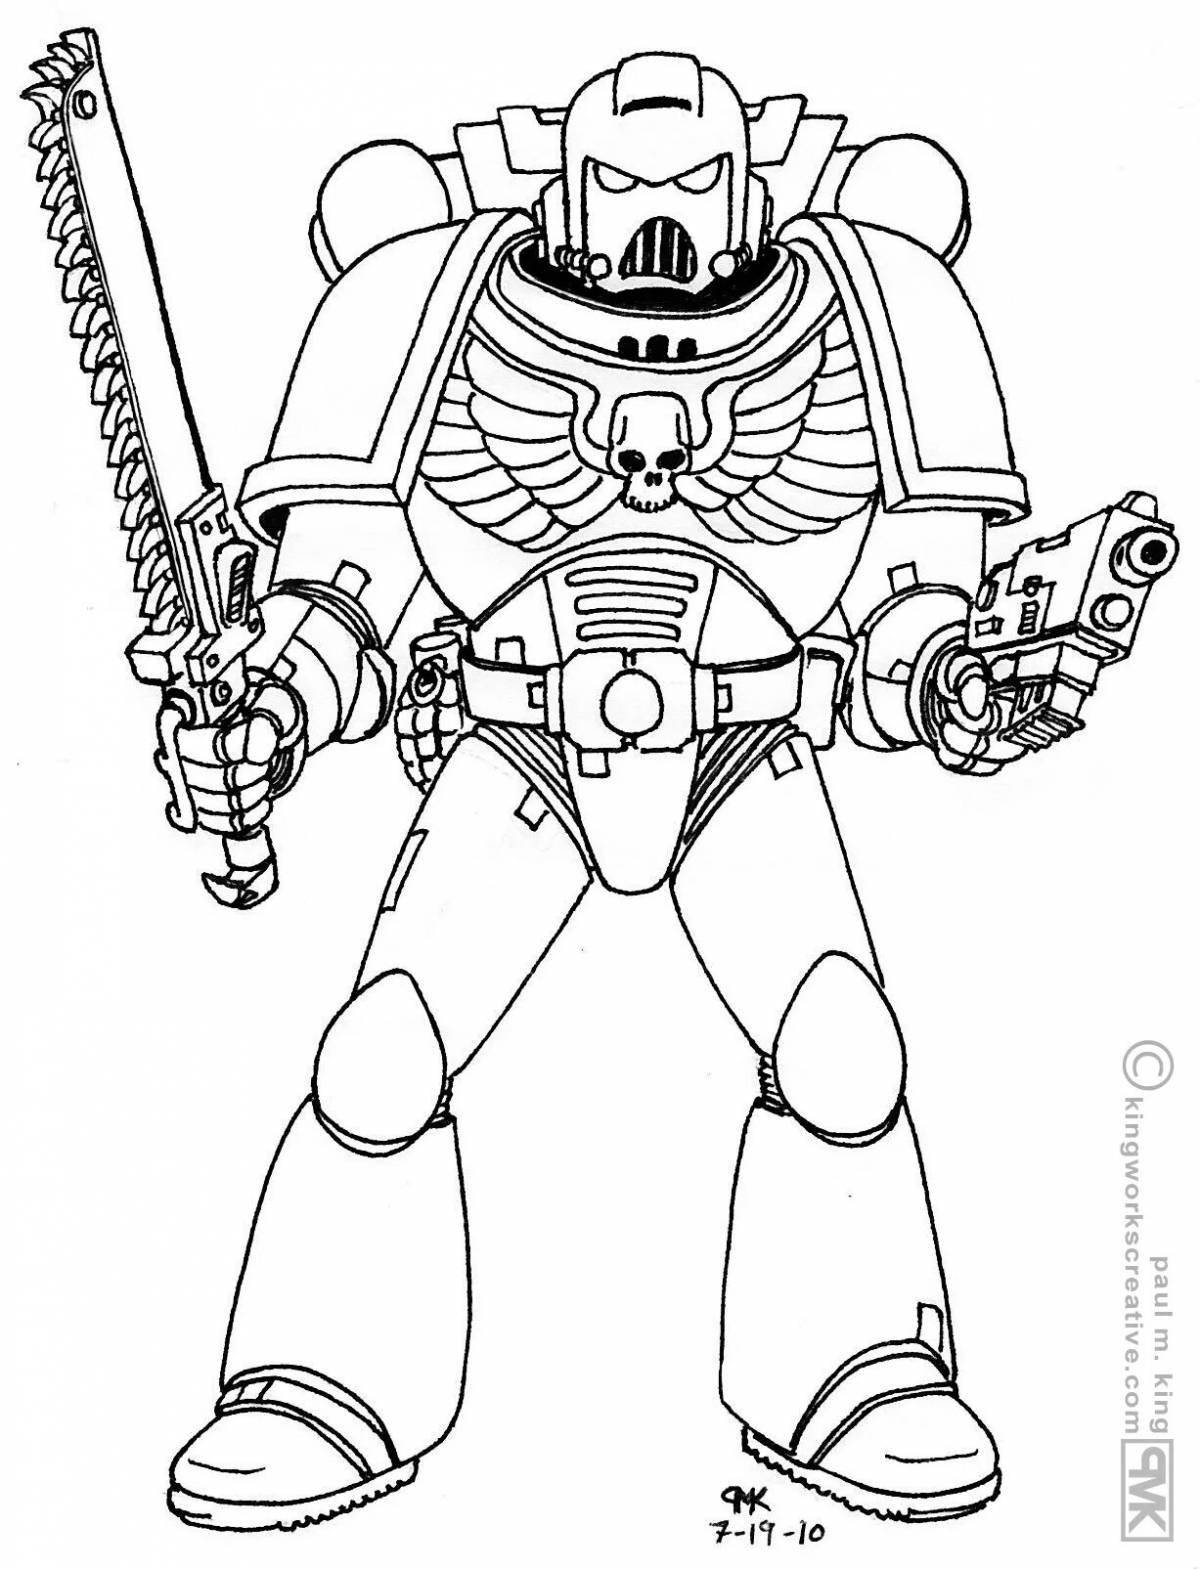 Coloring page happy police robot